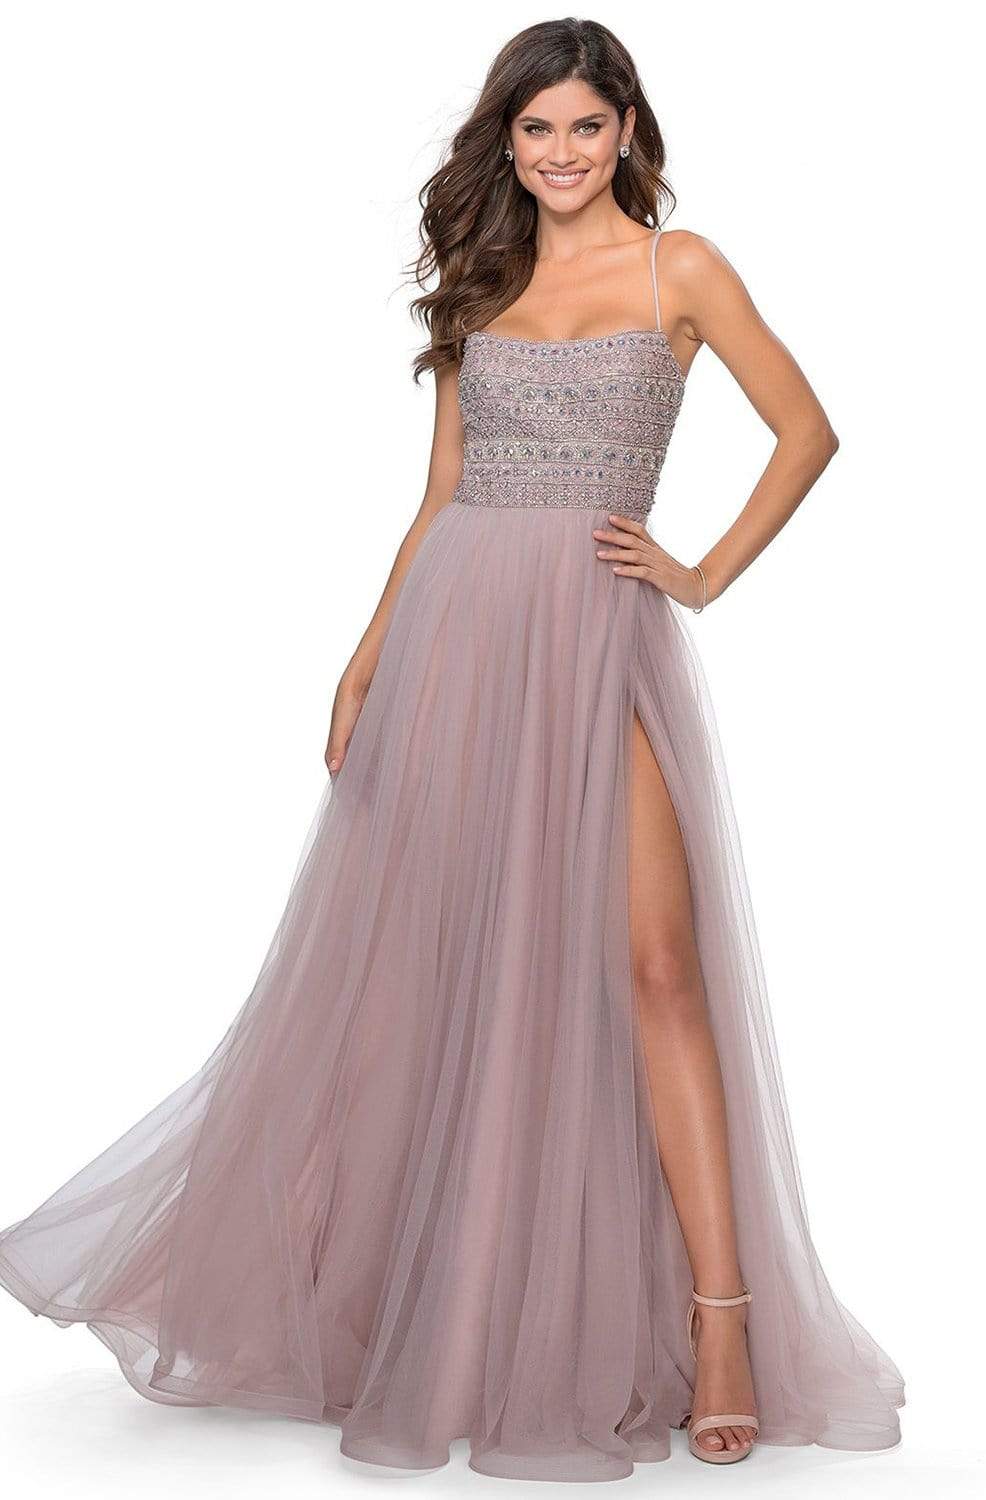 Image of La Femme - 28535 Strappy Beaded A-Line Evening Dress